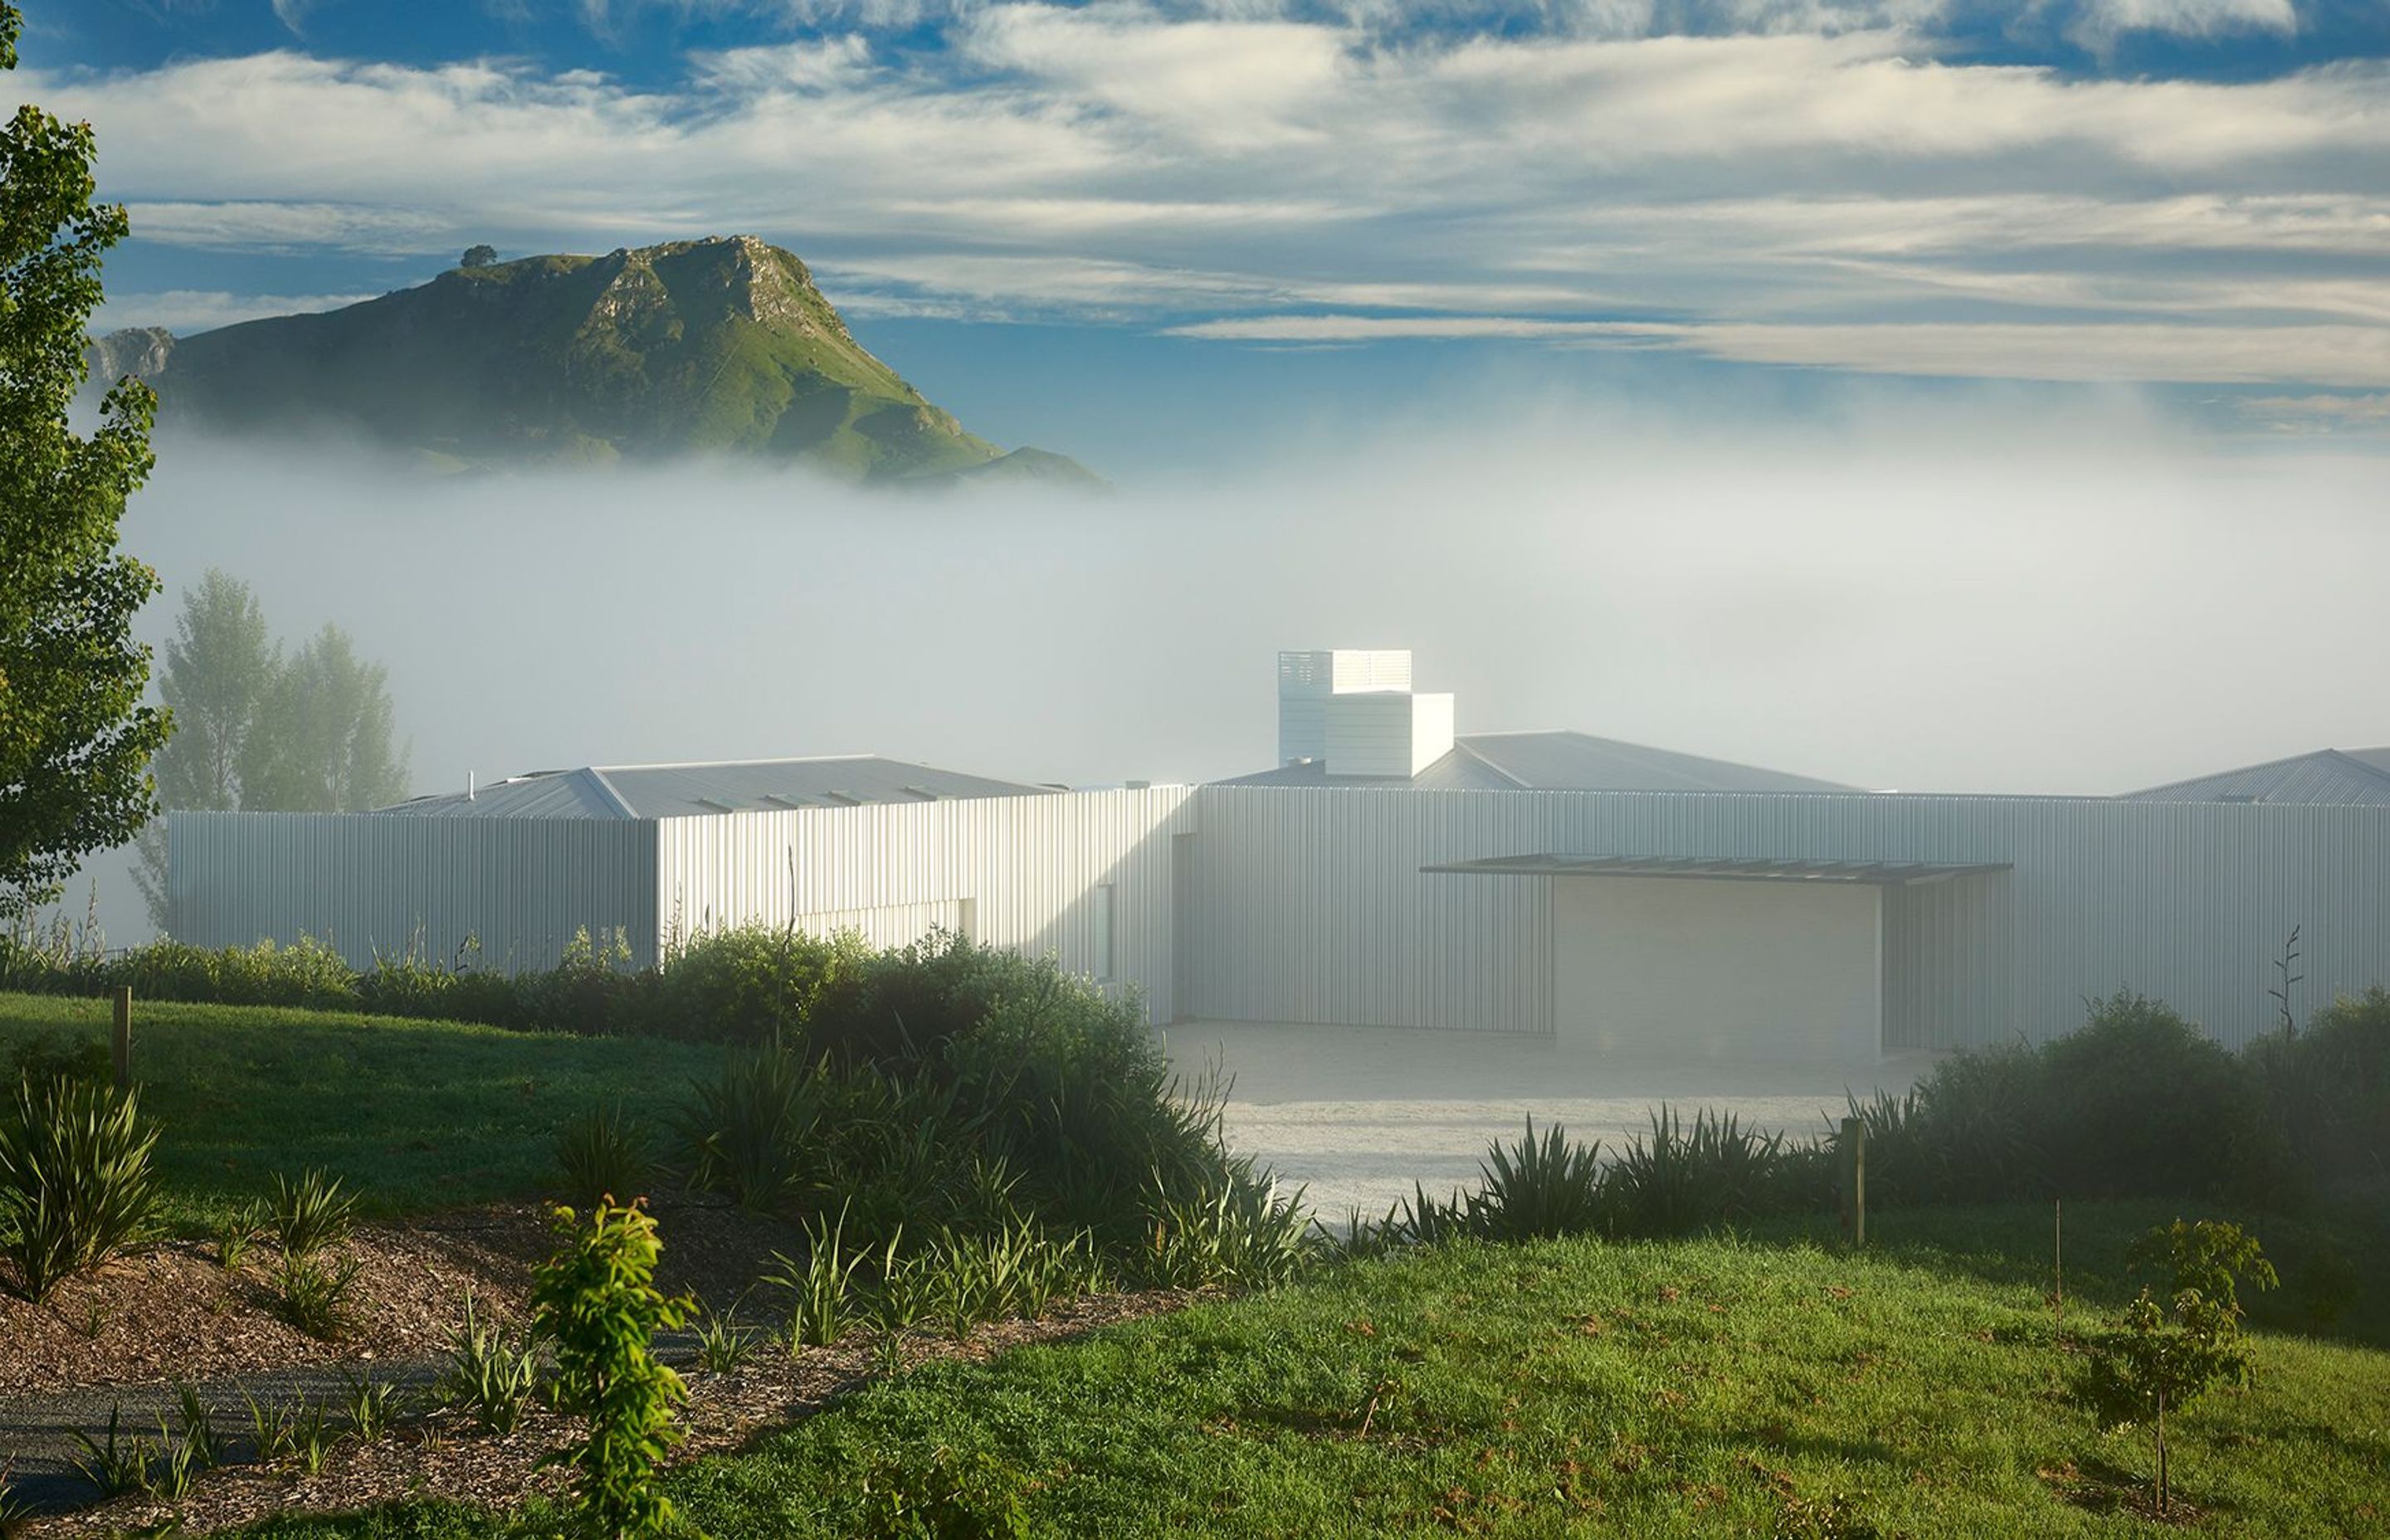 Te Mata Peak and a blanket of mist rise up behind Poplars 7's white form, a mid-century modern-inspired home located with the Hawkes Bay's Tukituki Valley. Photograph by Brian Culy.